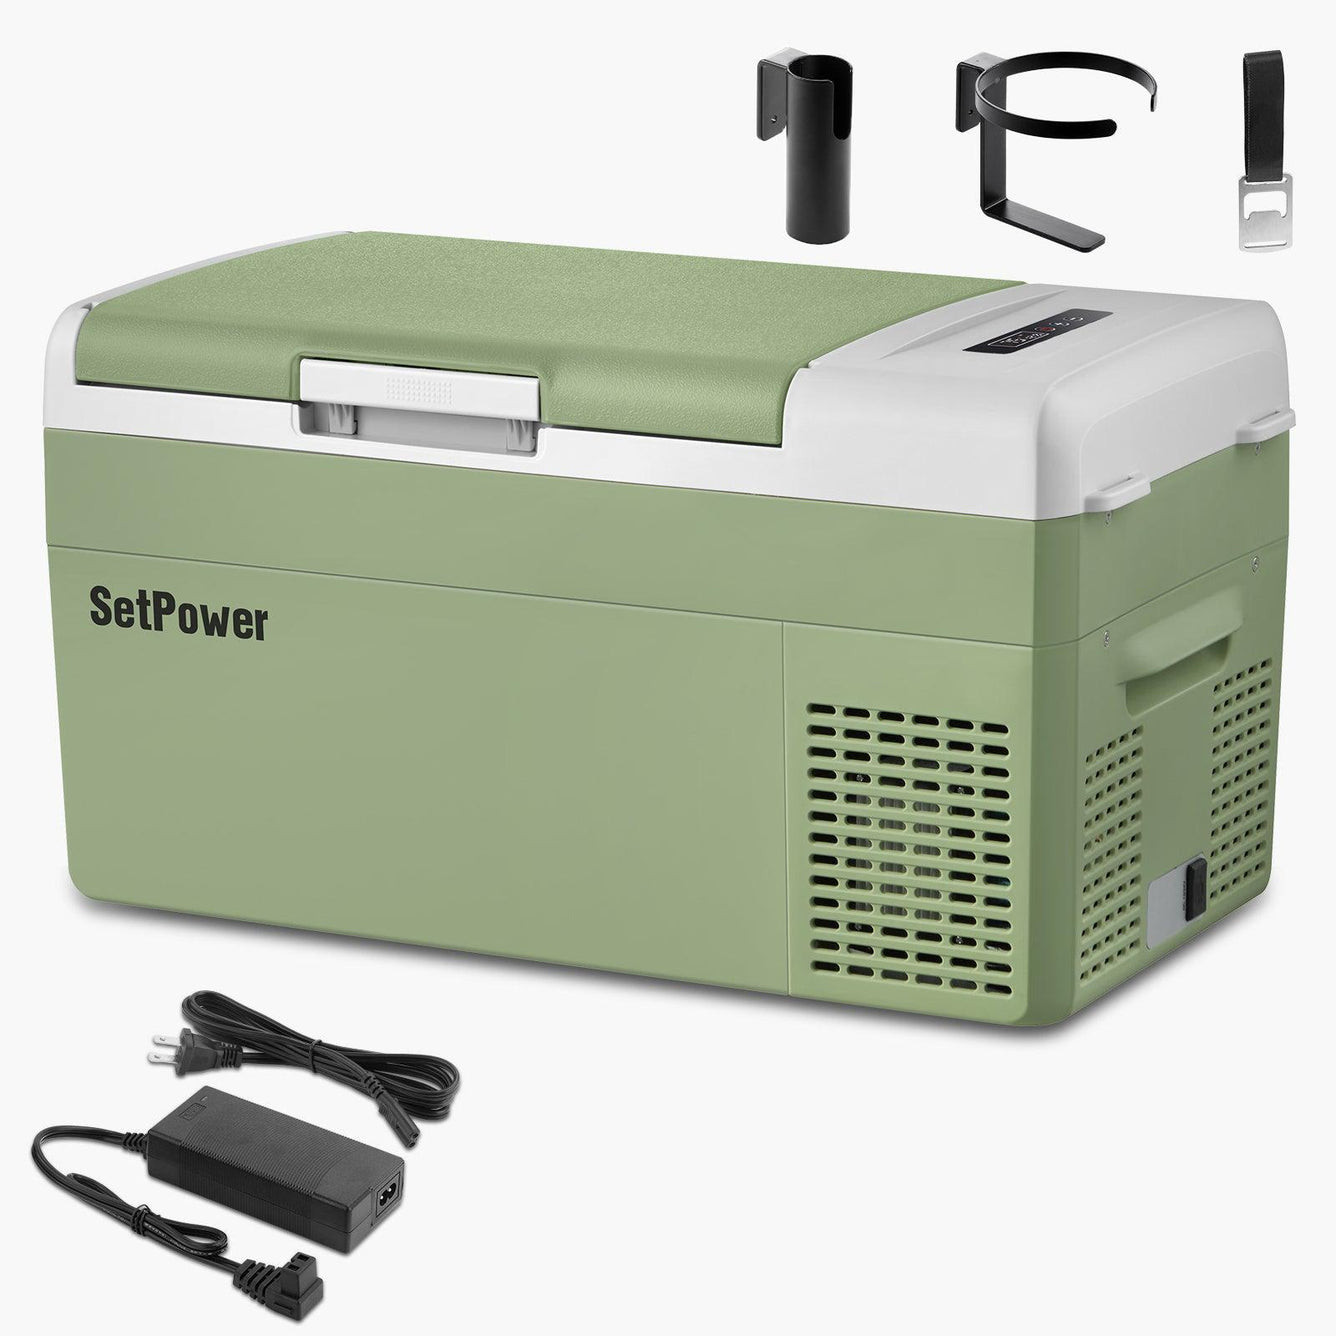 Setpower 21QT 12V Overland Refrigerator Electric Cooler with Free Gift